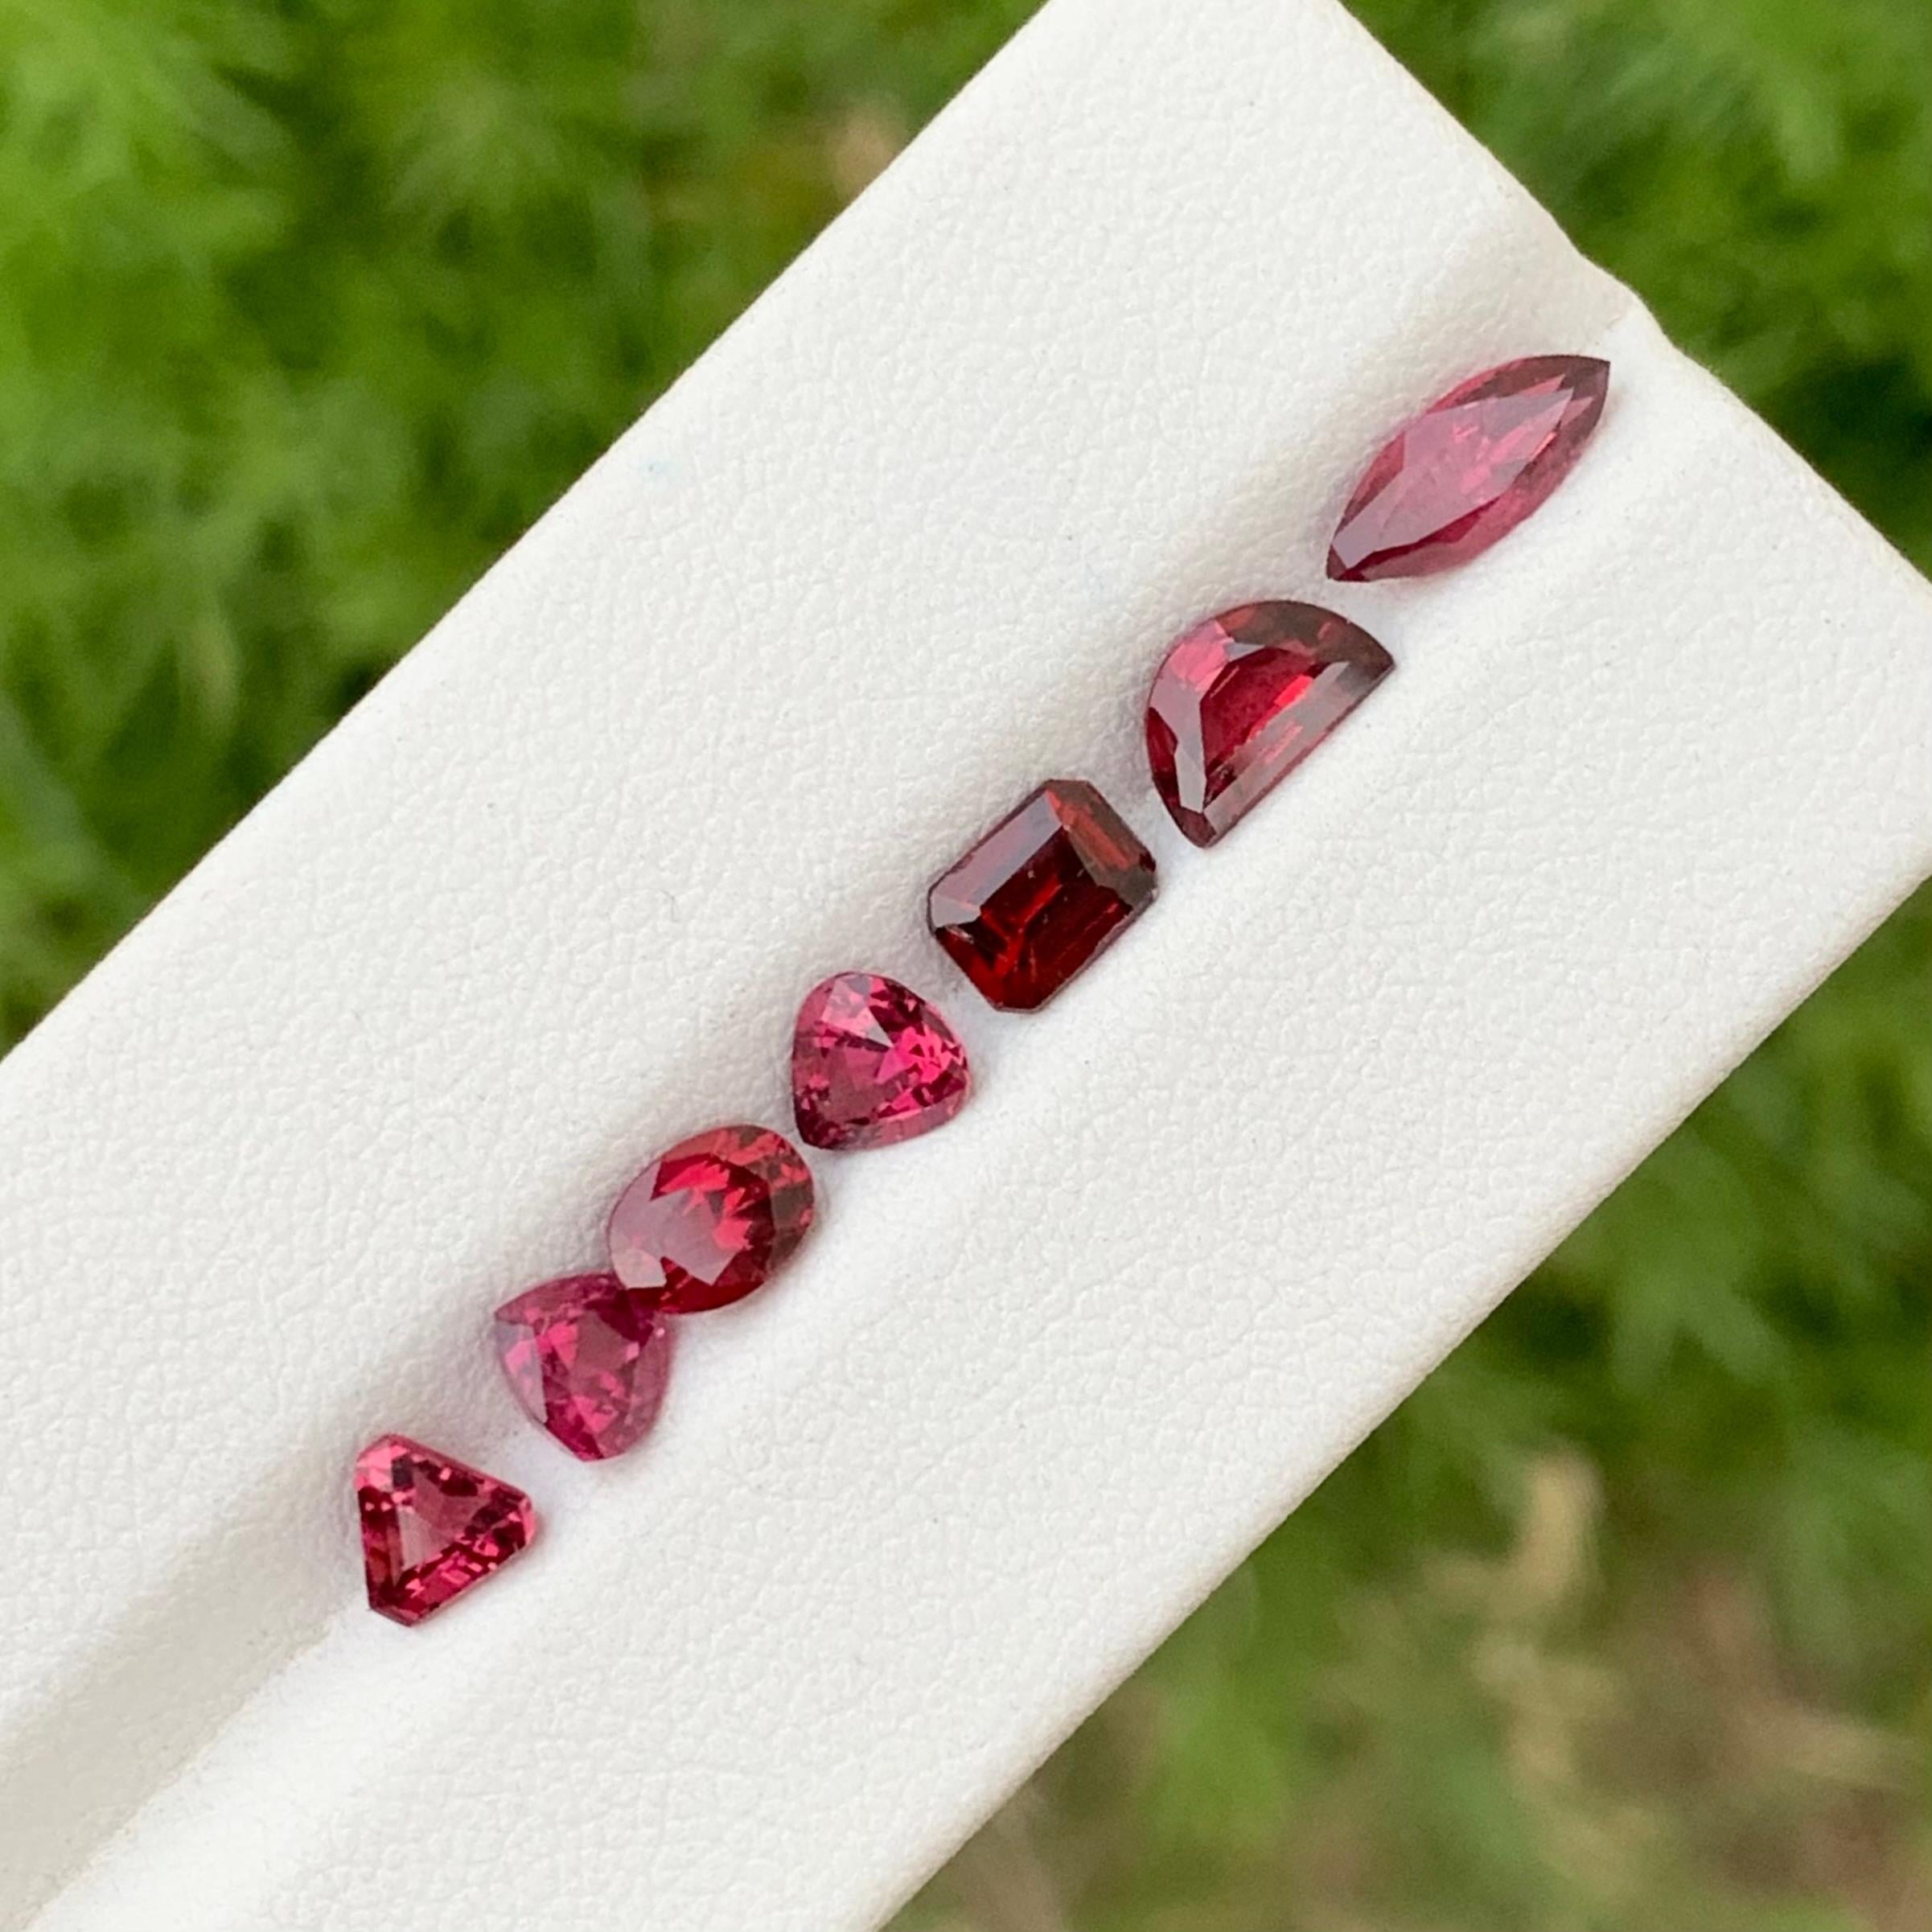 Gorgeous Multi Shape Natural Loose Rhodolite Garnet Lot 5.15 Carats For Jewelry For Sale 3